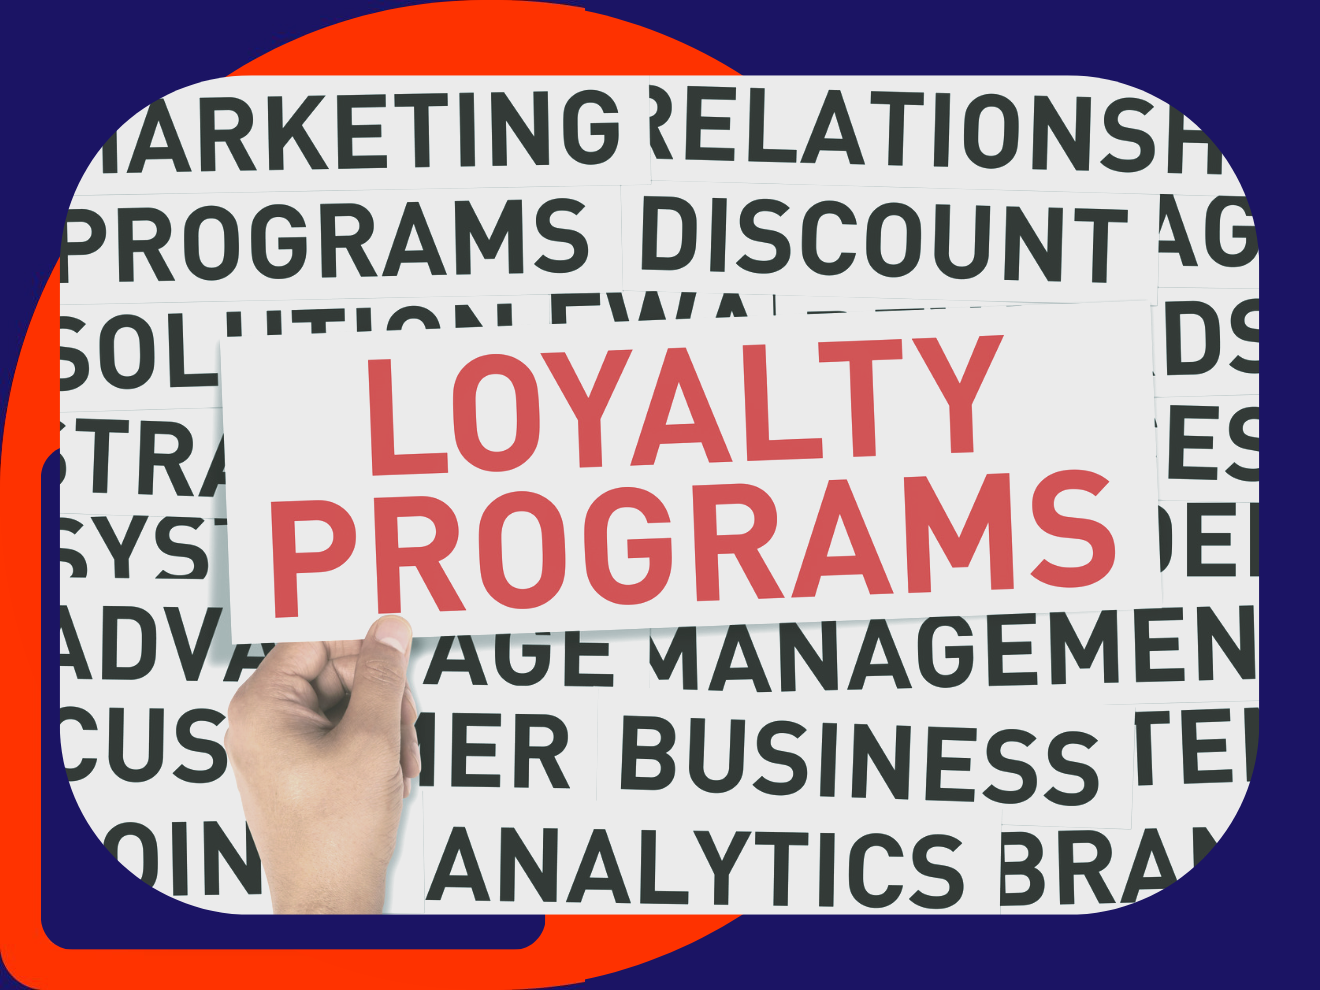 5 Effective Tips to Add More Value to Customer Loyalty Program